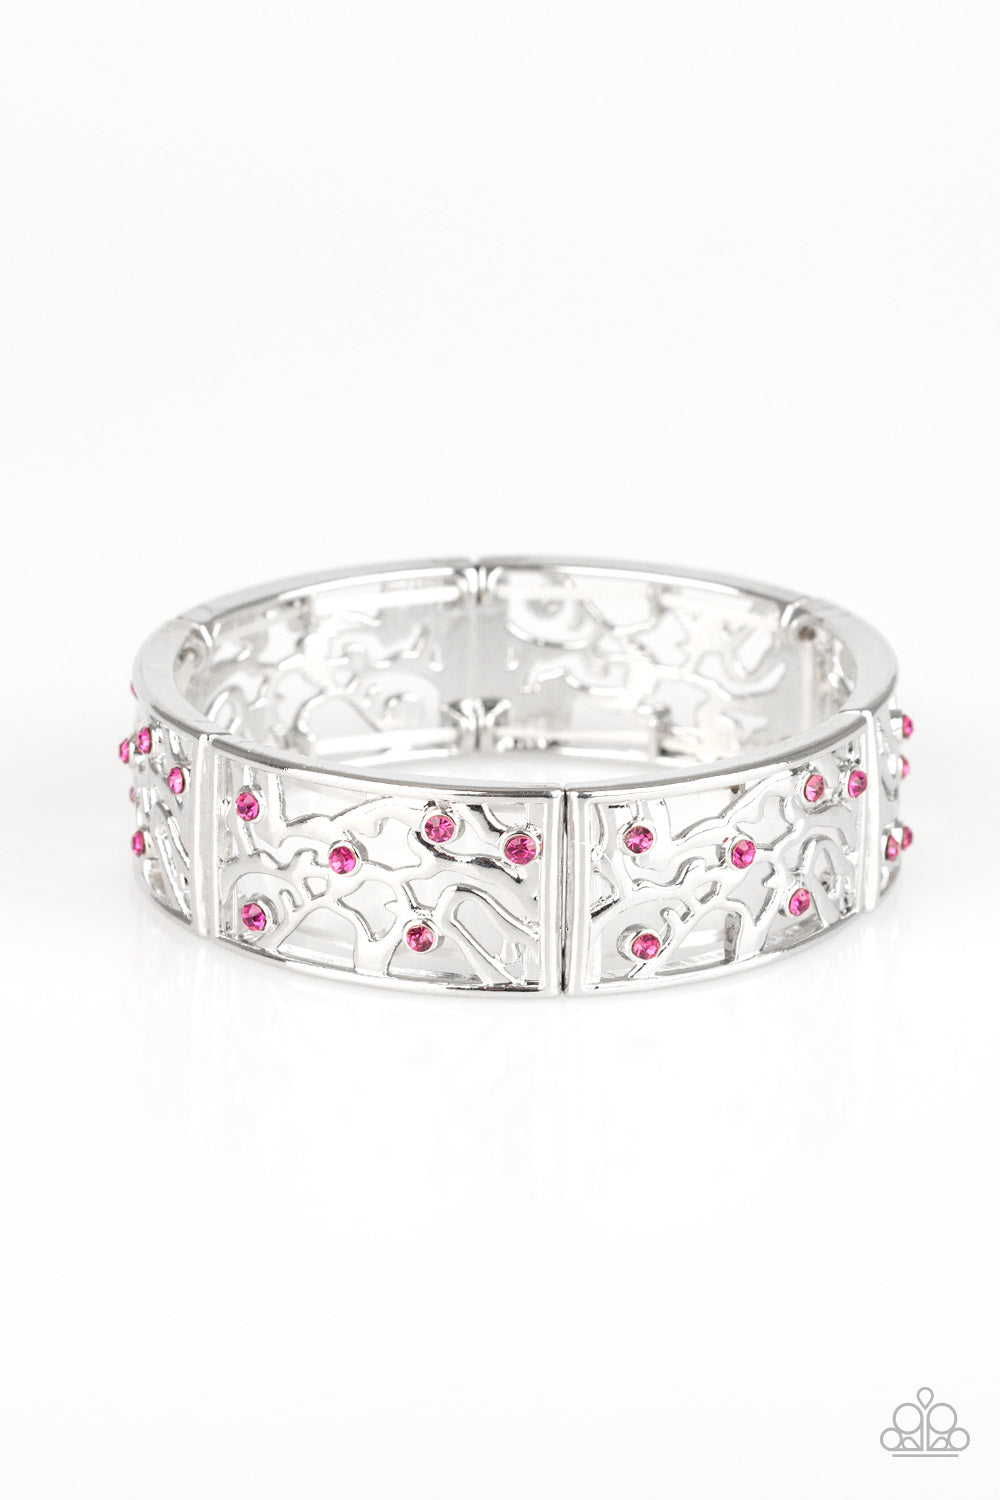 Paparazzi Accessories - Yours and VINE - Pink Bracelet